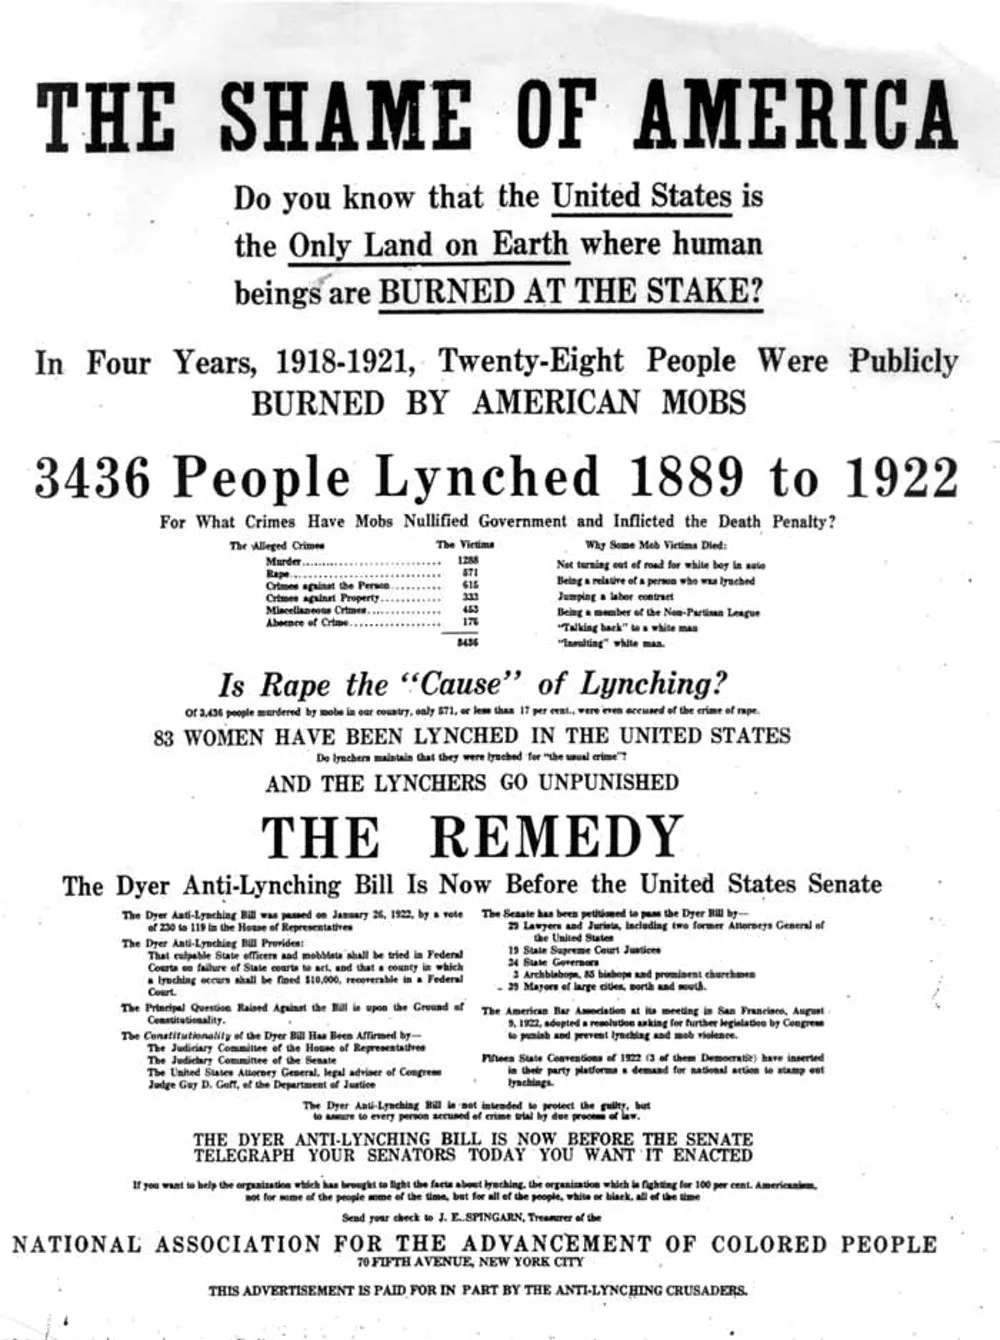 Flyer covered in text, with the main text reading: "THE SHAME OF AMERICA Do you know that the United States is the Only Land on Earth where human beings are BURNED AT THE STAKE?" and "3463 People Lynched 1889 to 1922"